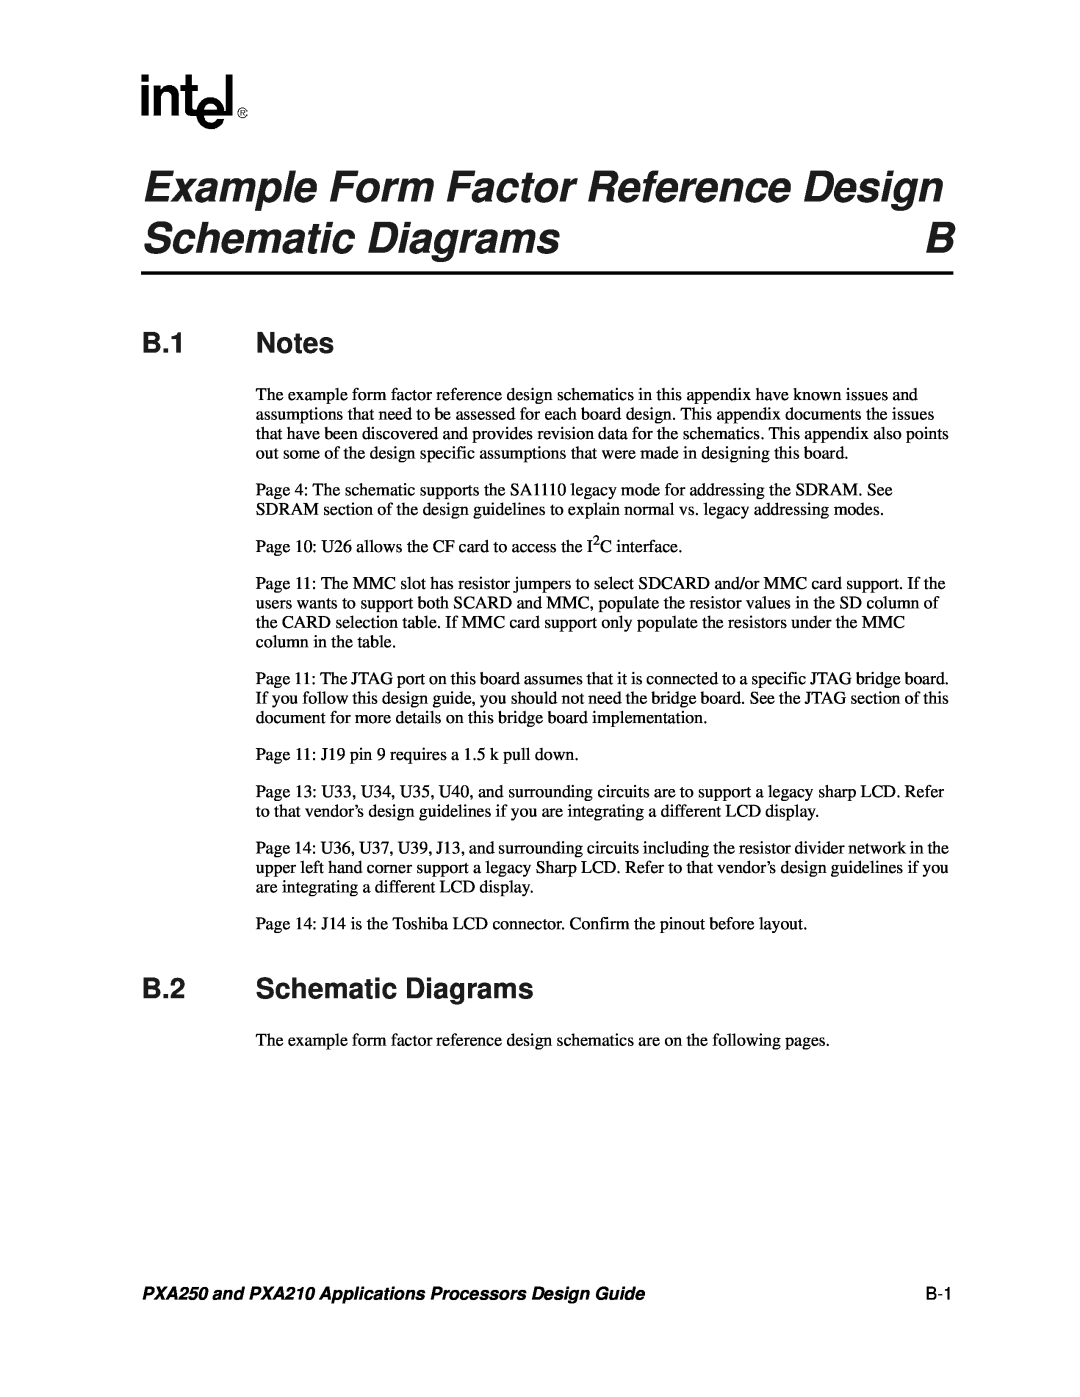 Intel PXA250 and PXA210 manual Example Form Factor Reference Design, B.1 Notes, B.2 Schematic Diagrams 